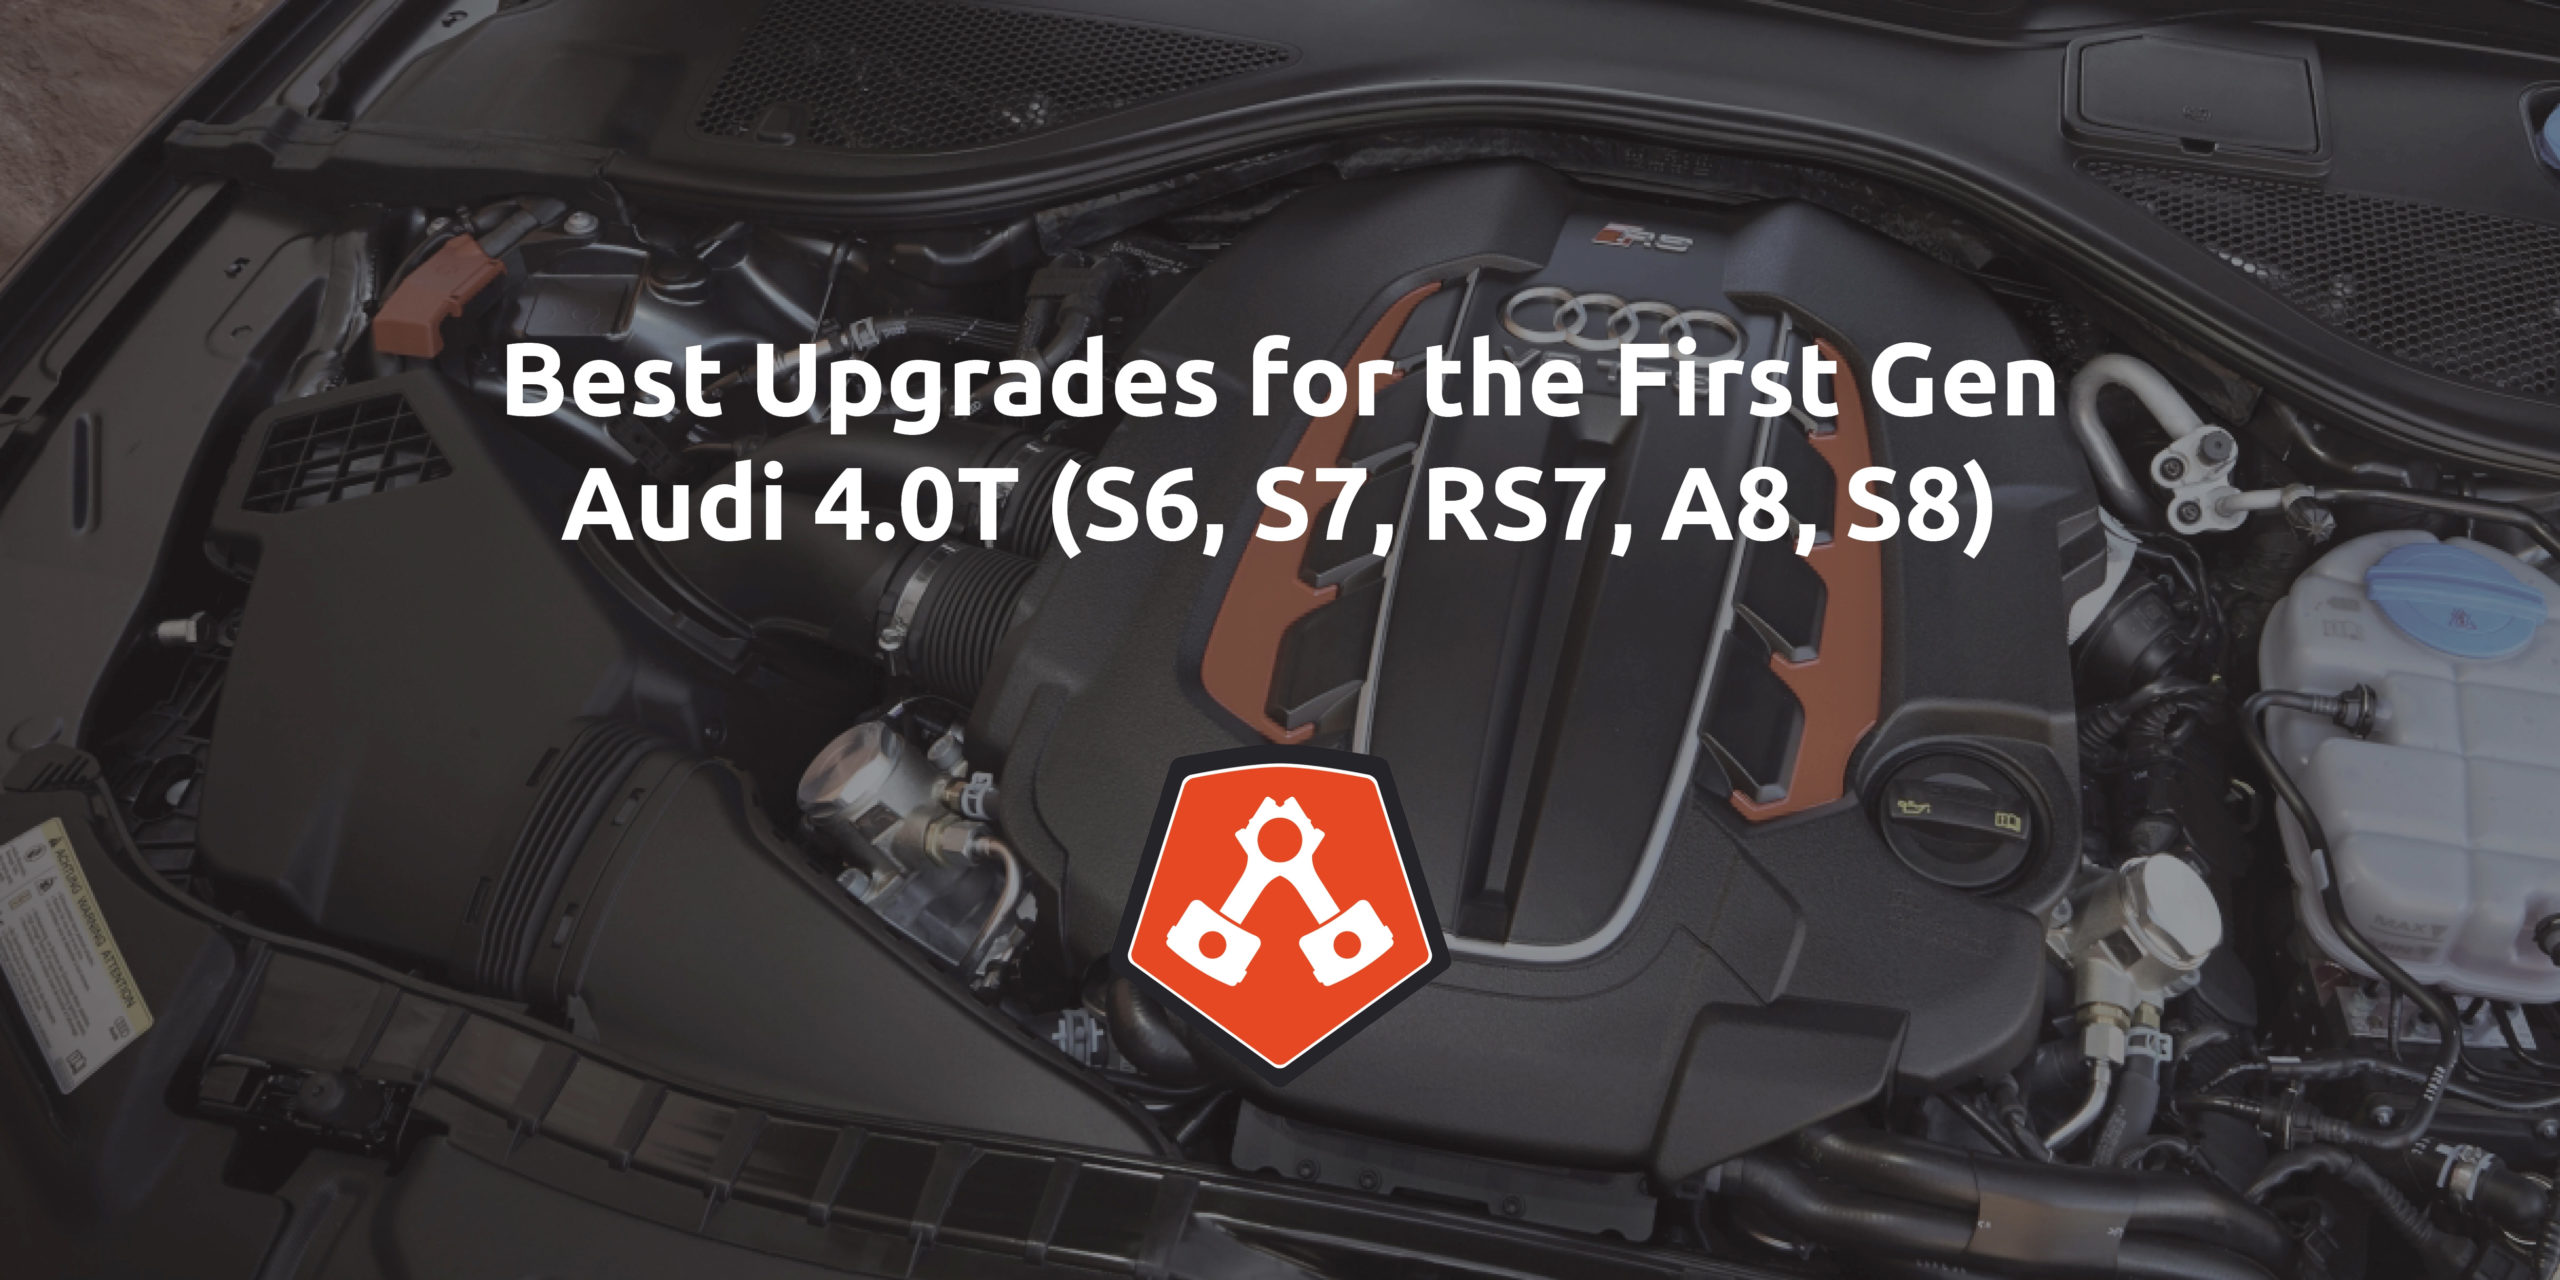 Best Upgrades for the First Gen Audi 4.0t (S6, S7, RS7, A8, S8)